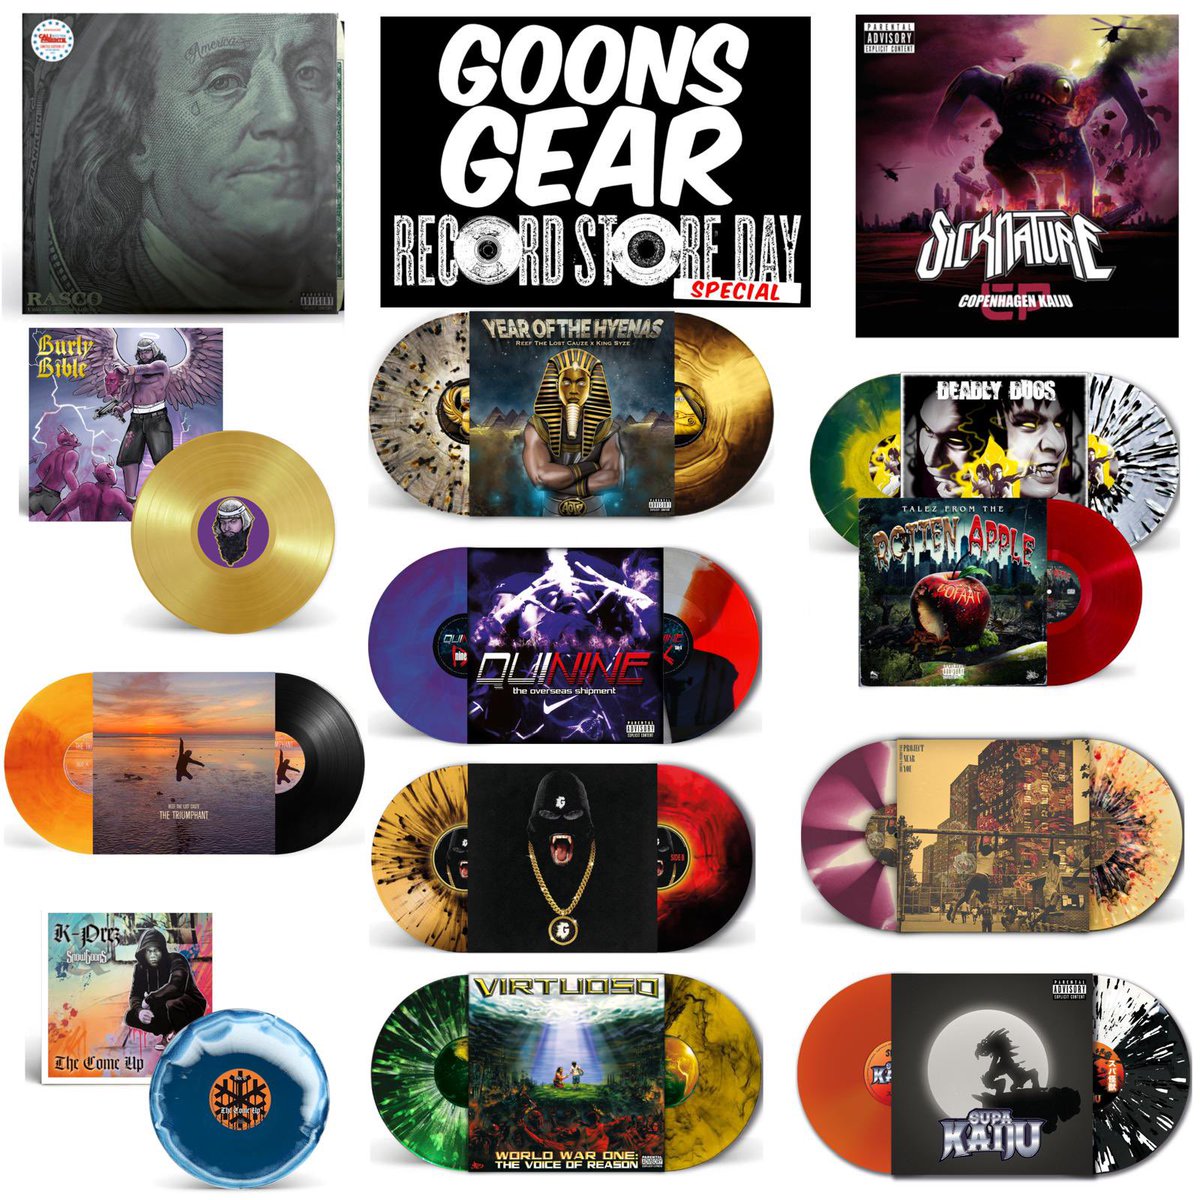 RecordStoreDay tomorrow at GoonsGear 40% Off with the code in the newsletter so better subscribe at goonsgear.com